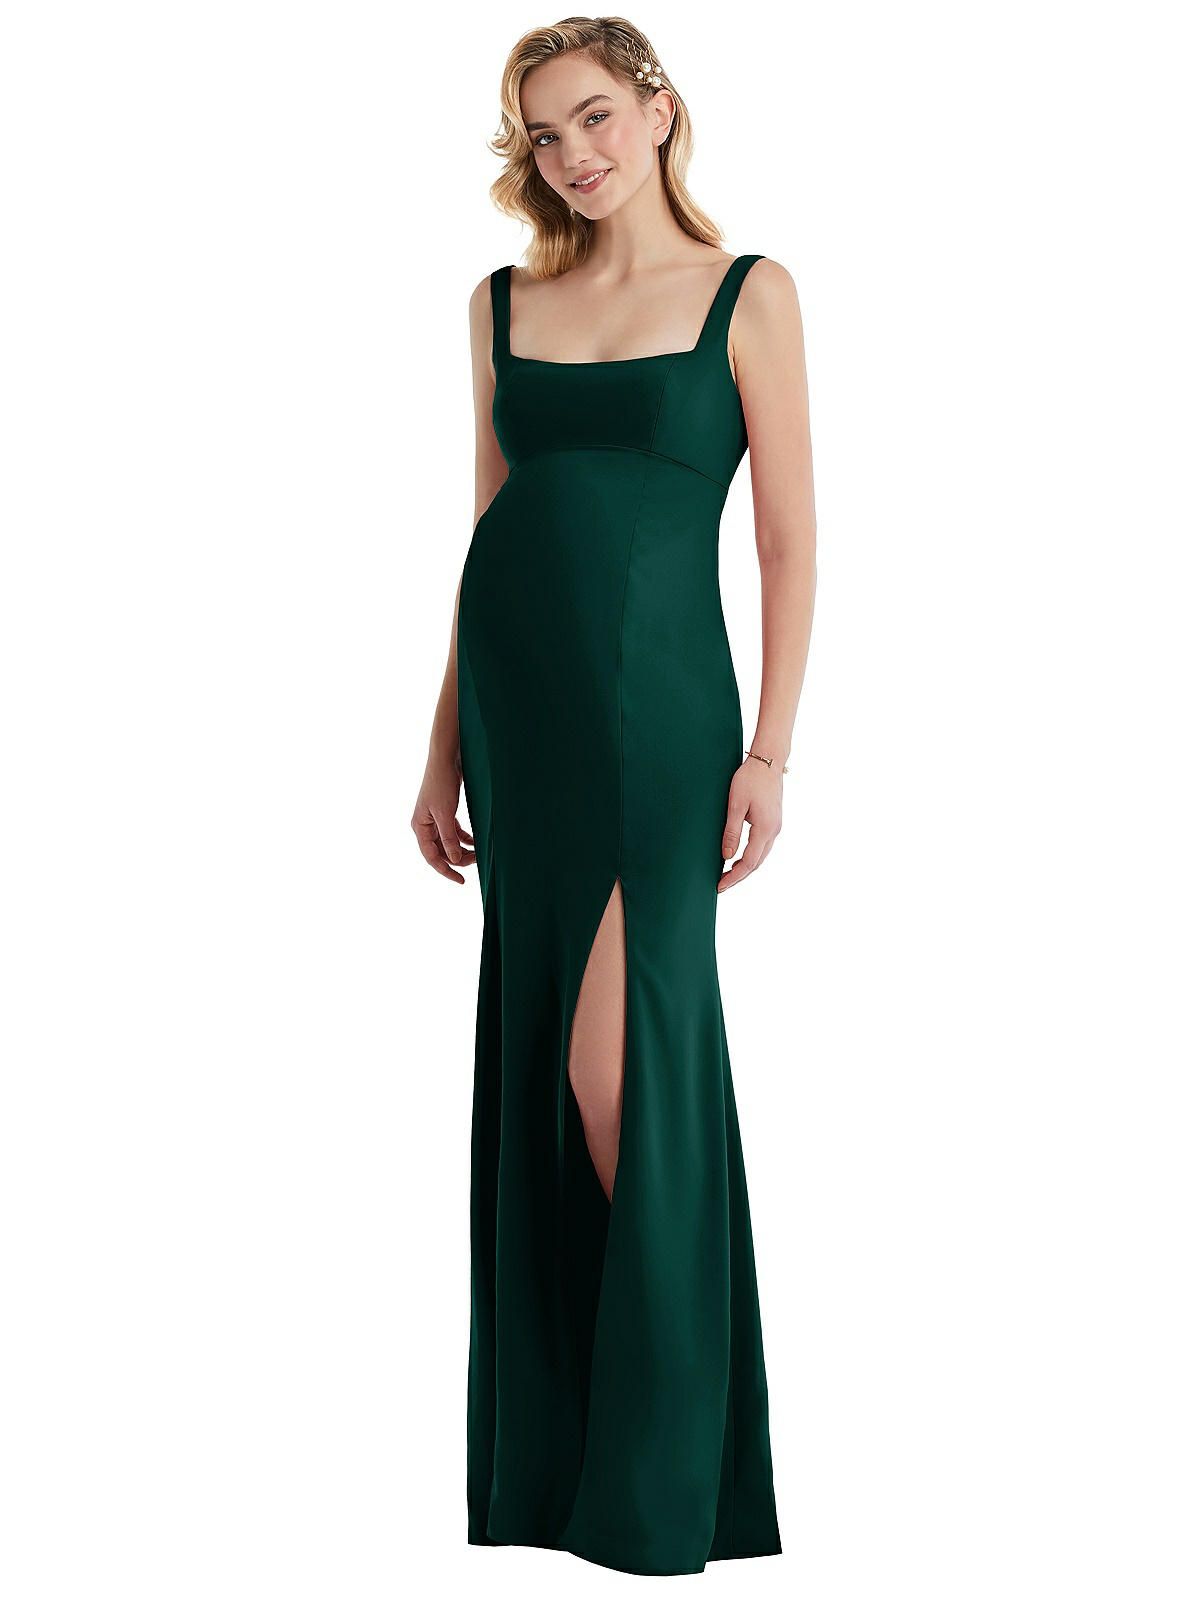 Wide Strap Square Neck Maternity Trumpet Gown in Evergreen | The Dessy Group